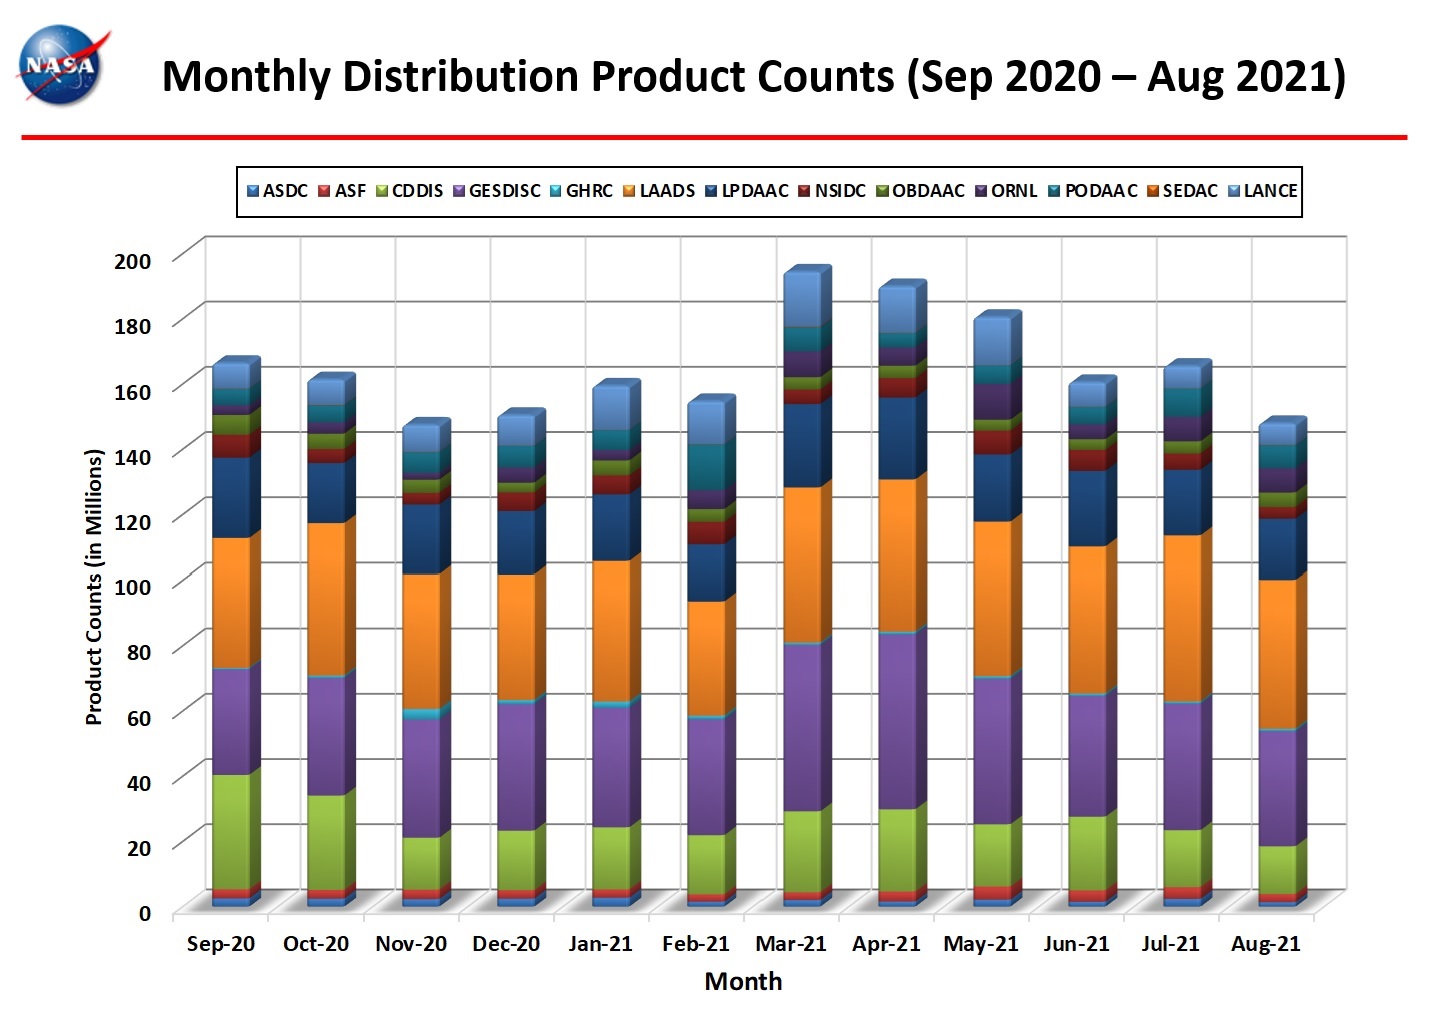 Monthly Distribution Product Counts Sep 2020 thru Aug 2021